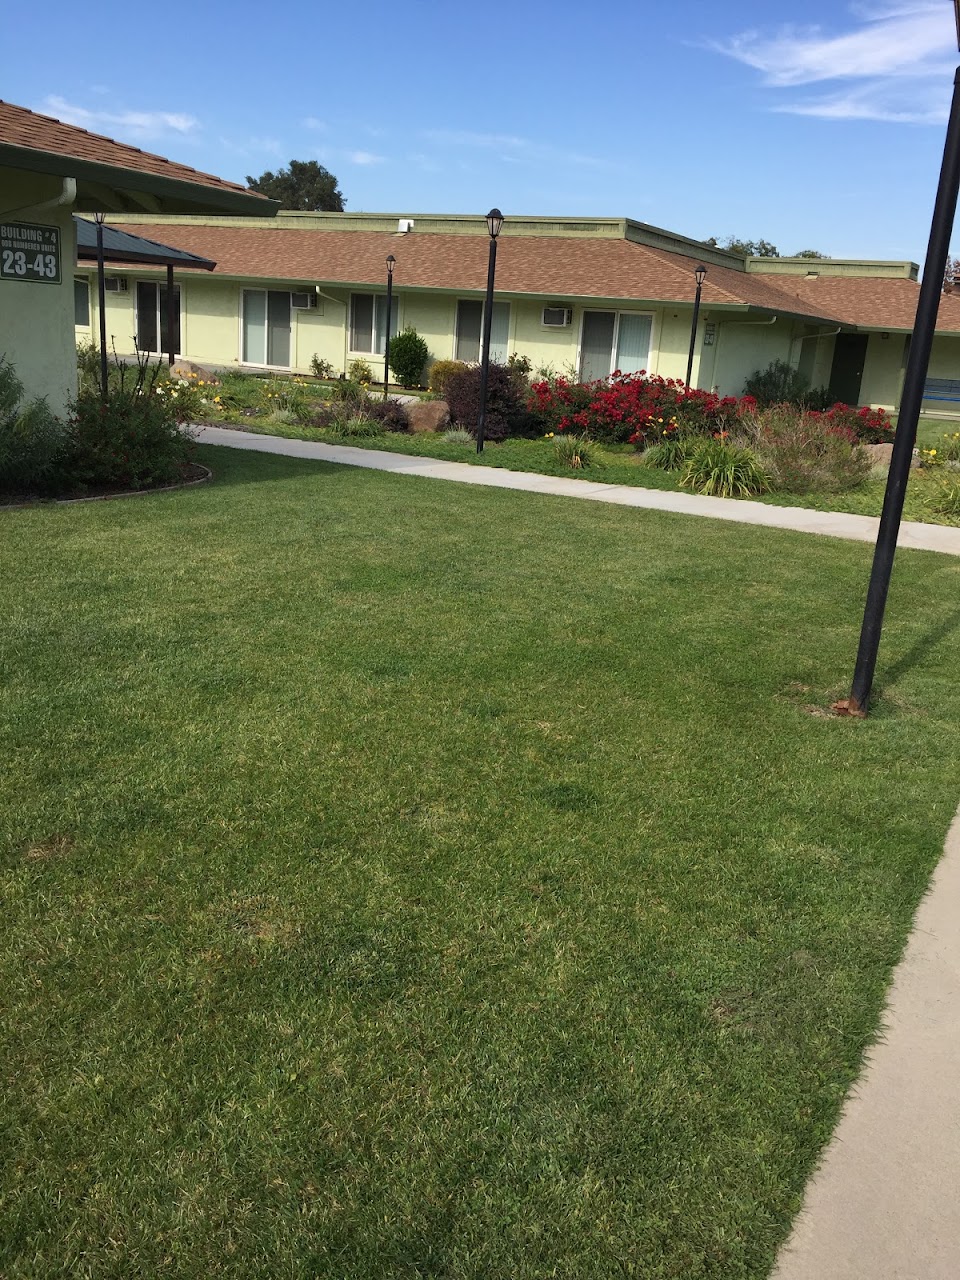 Photo of GARDEN APTS. Affordable housing located at 40 N LEE AVE OAKDALE, CA 95361